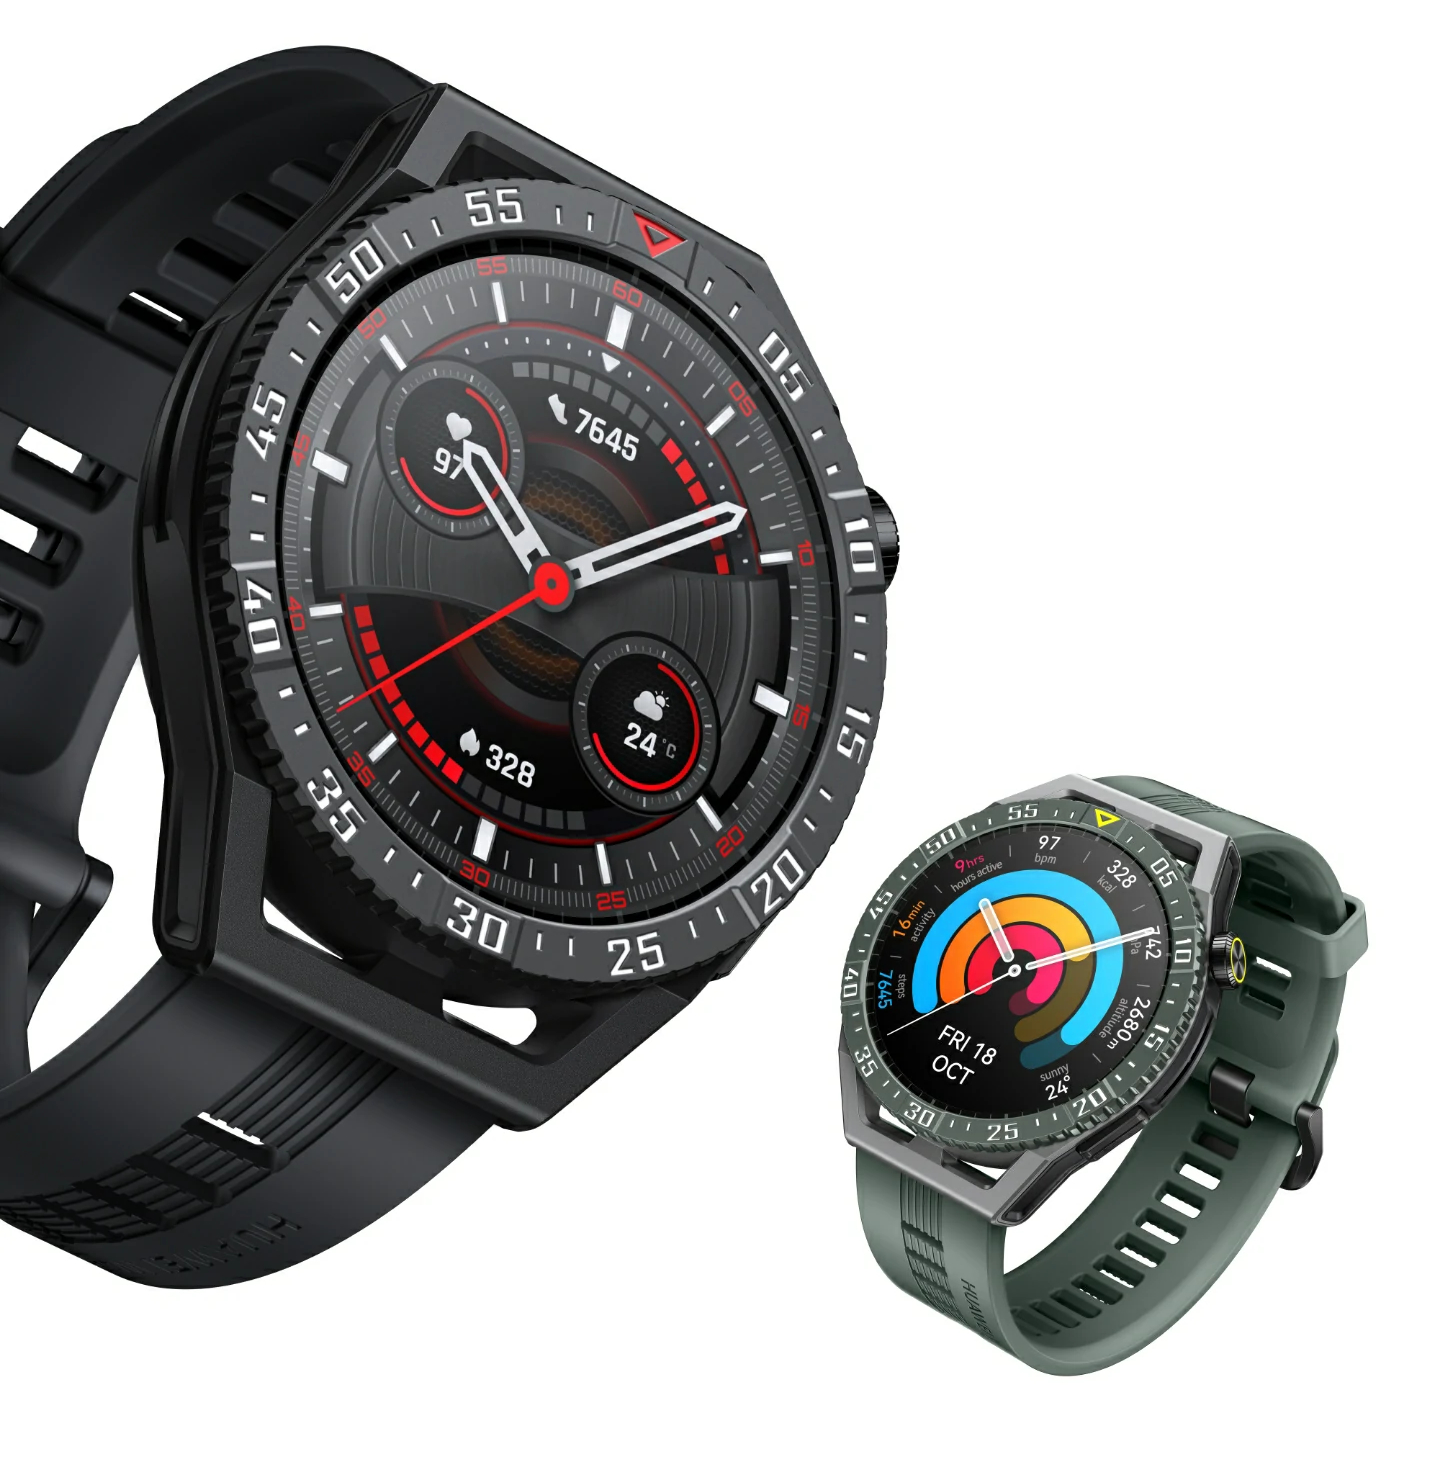 Huawei Watch Gt 3 Se Launches Globally As A Cheaper Watch Gt 3 Model With Up To 2 Weeks Of Battery Life Notebookcheck Net News